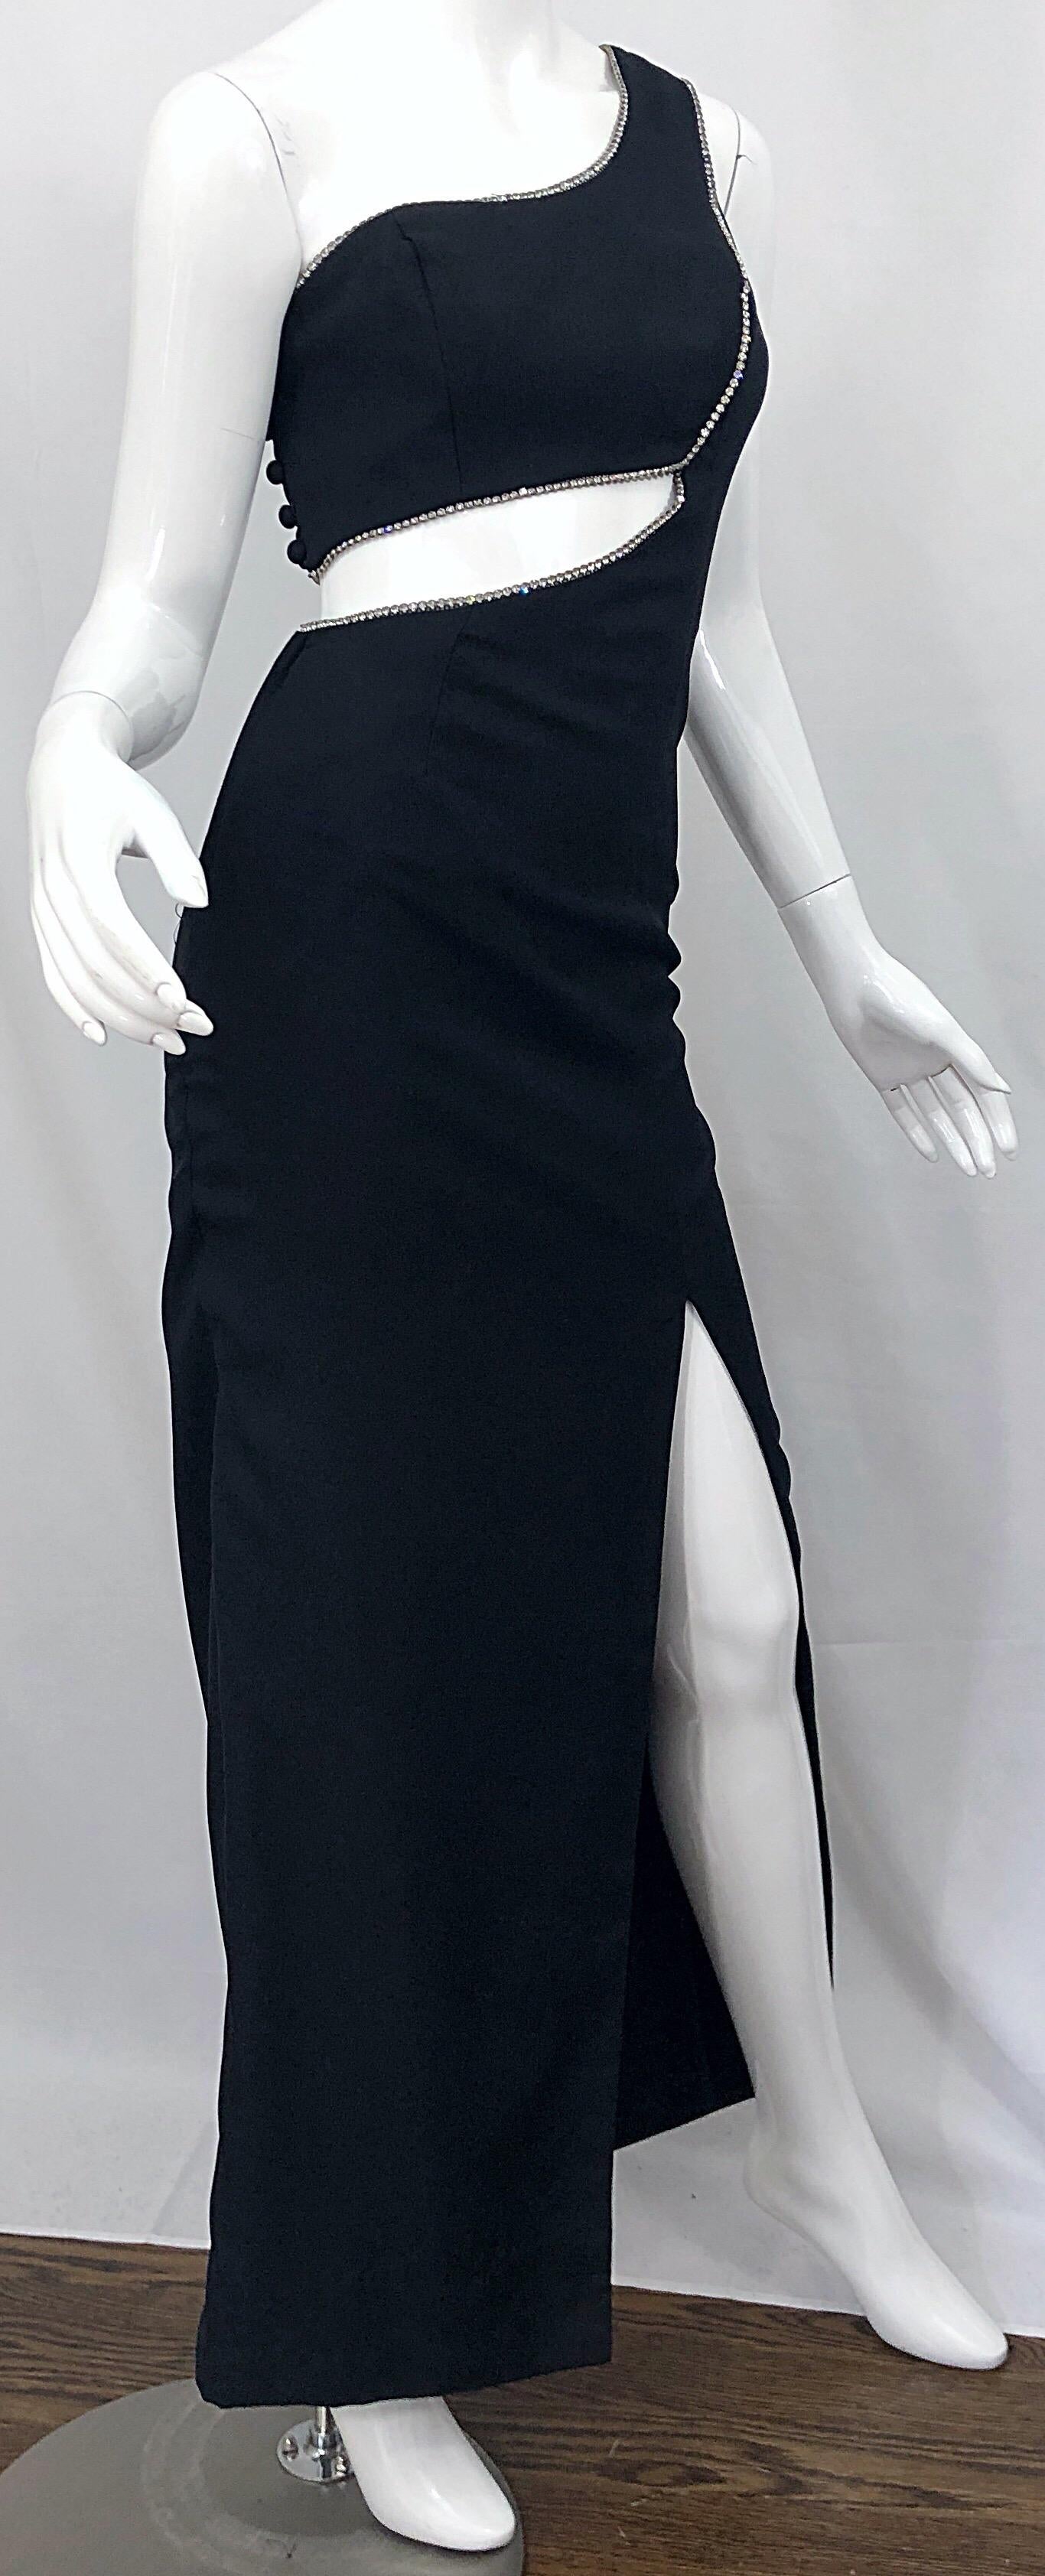 Sexy 1990s Vintage Black Crepe Rayon + Rhinestones One Shoulder Cut - Out Gown For Sale 4